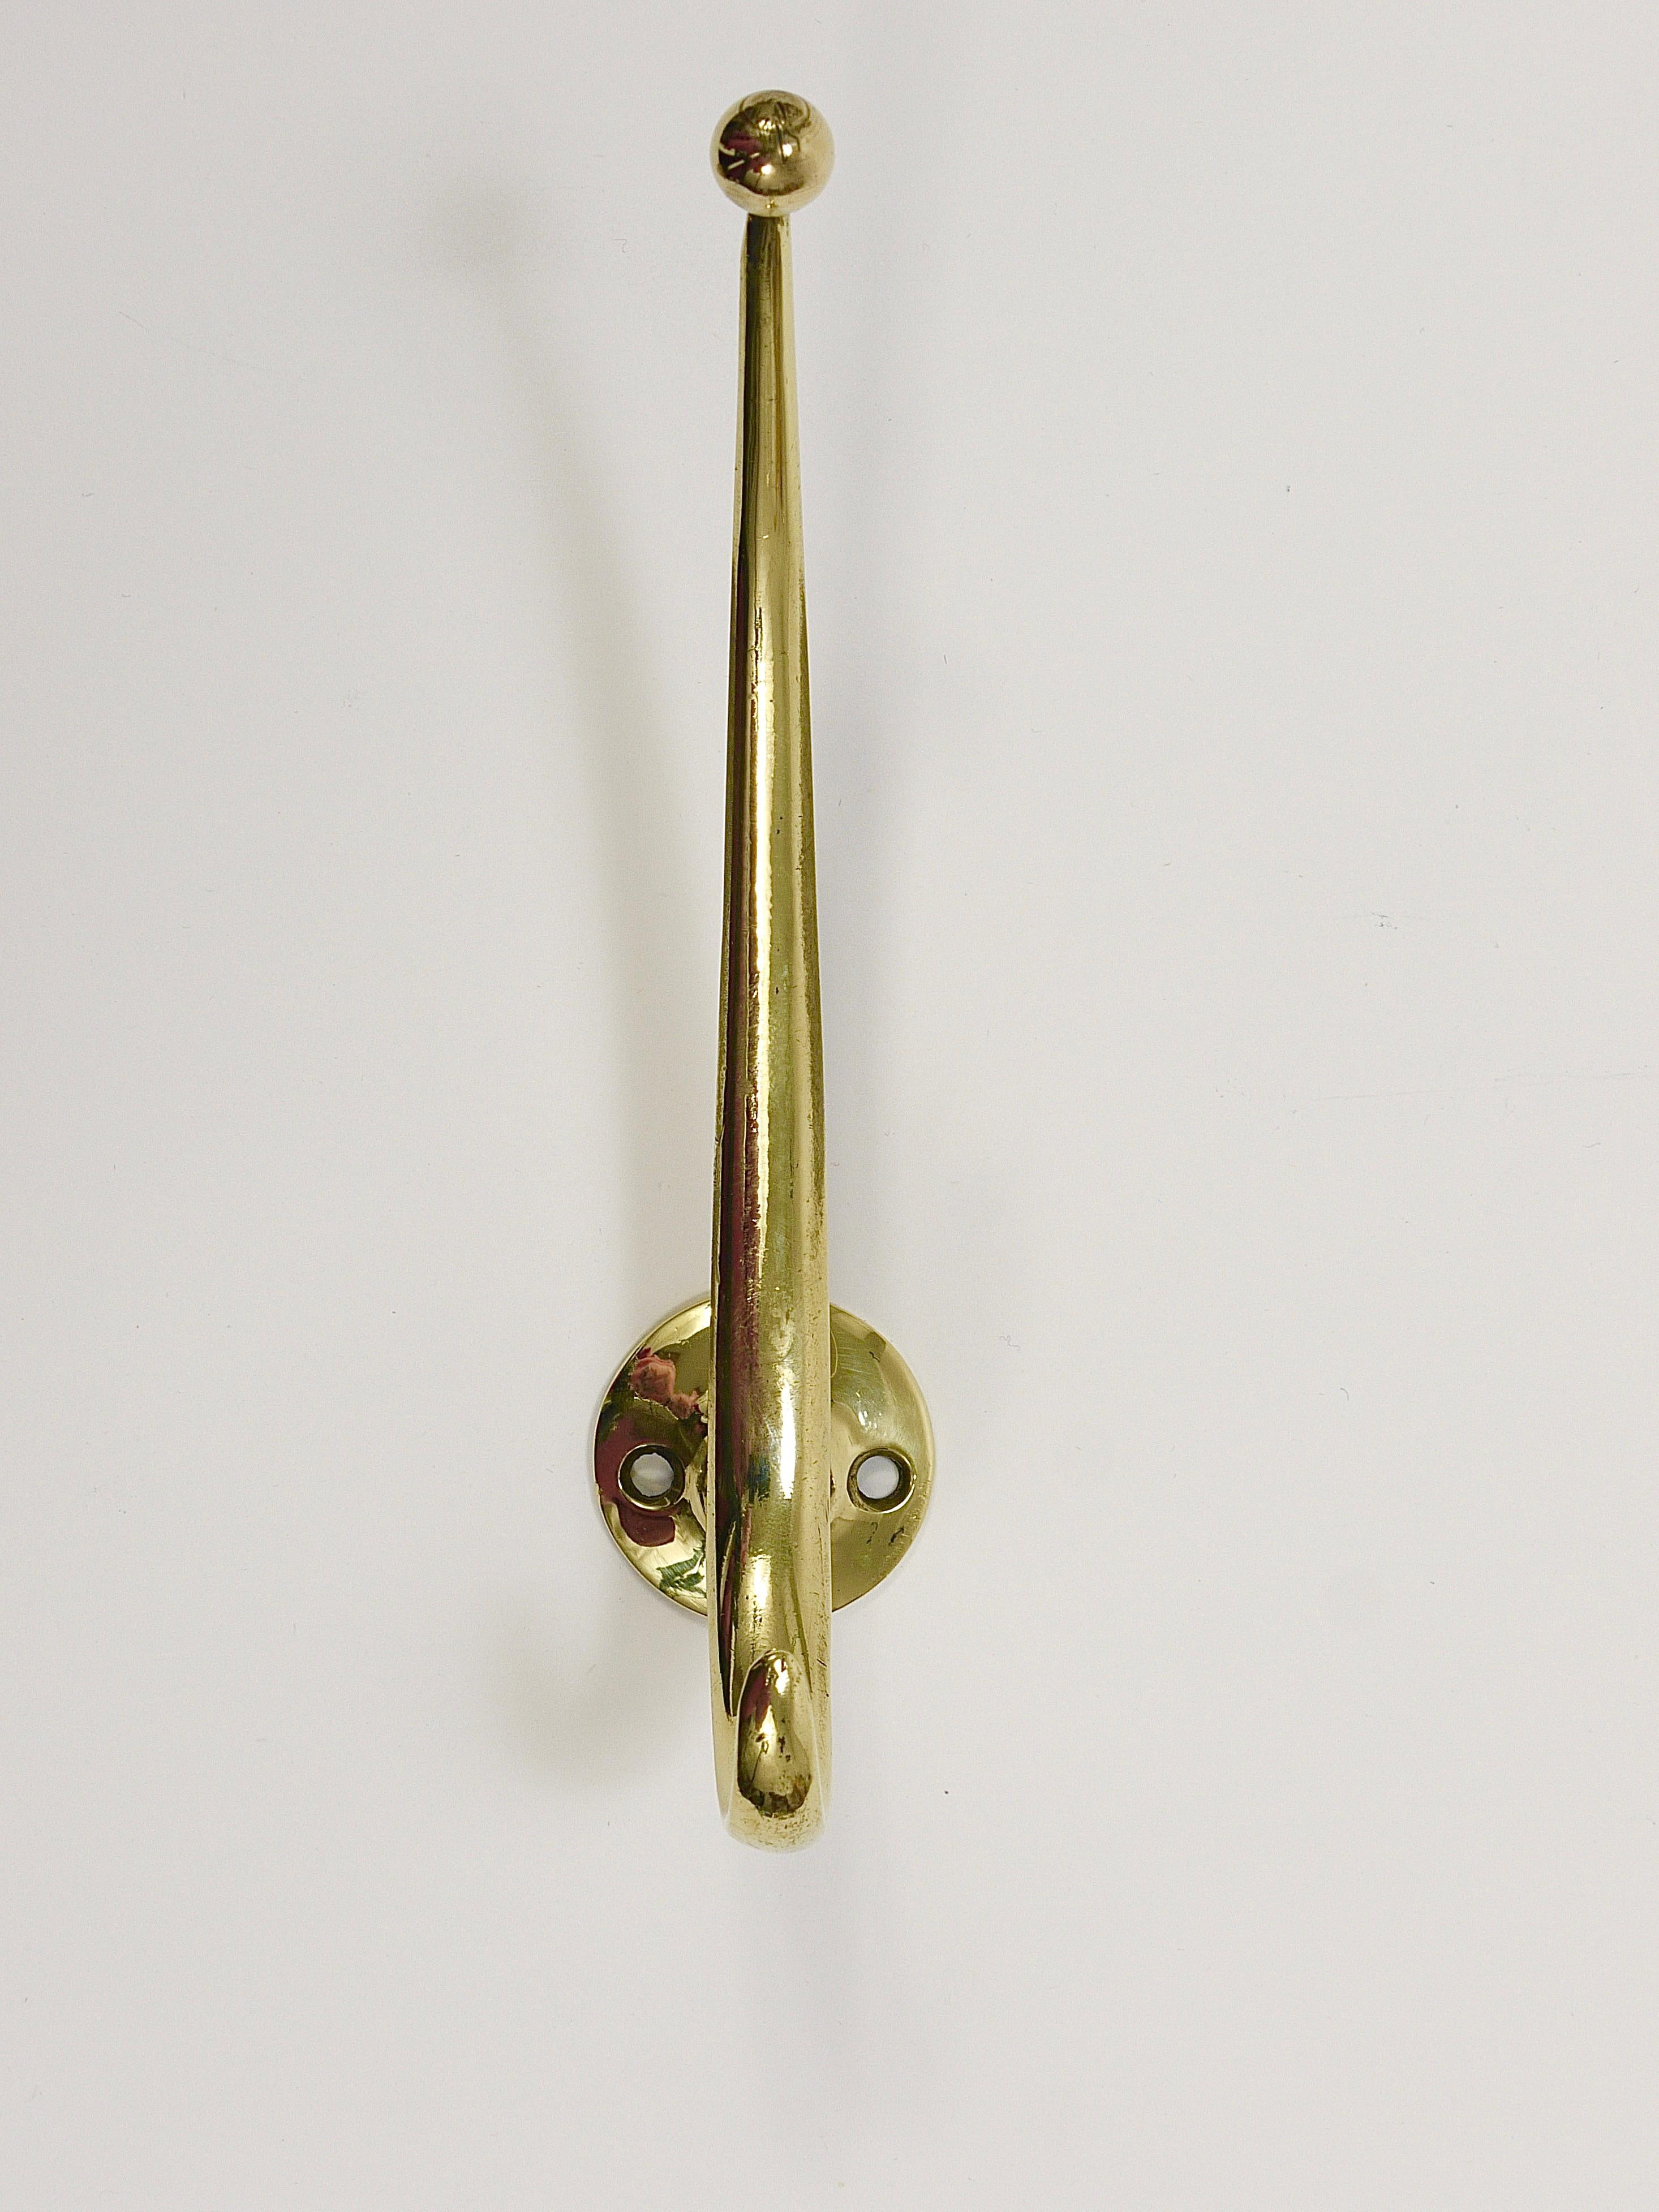 Six Franz Hagenauer Vienna Mid-Century Curved Brass Wall Coat Hooks, 1950s For Sale 2